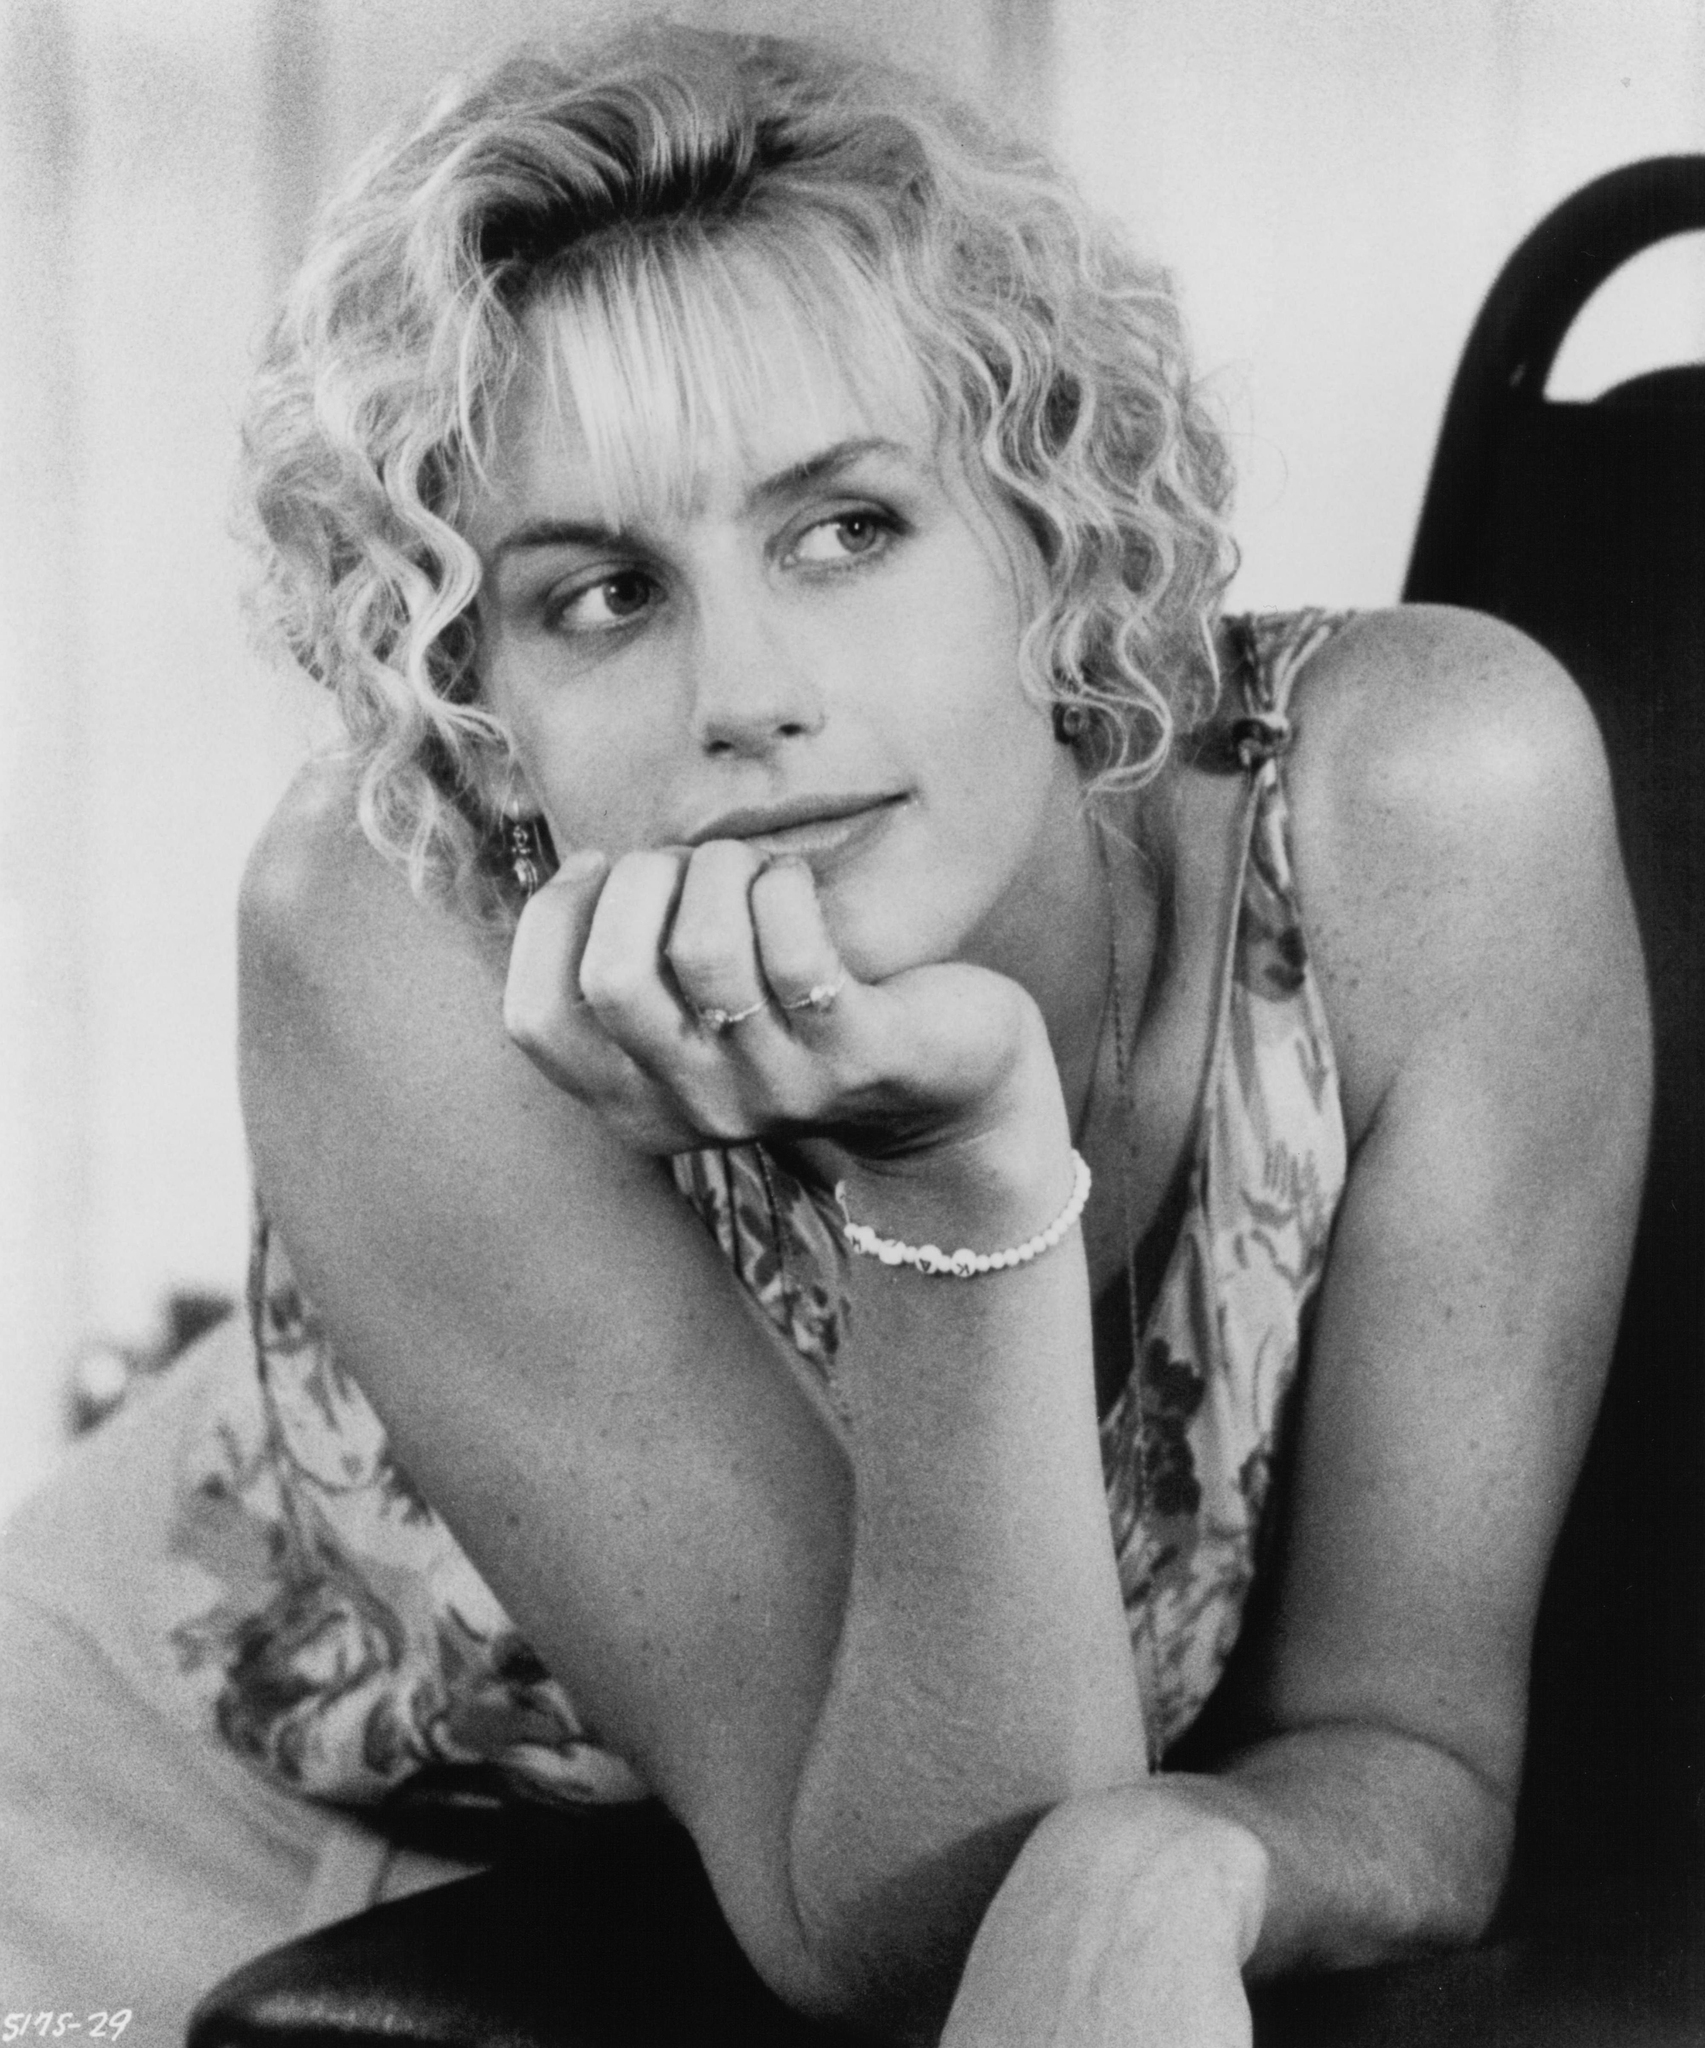 Still of Daryl Hannah in Crazy People (1990)